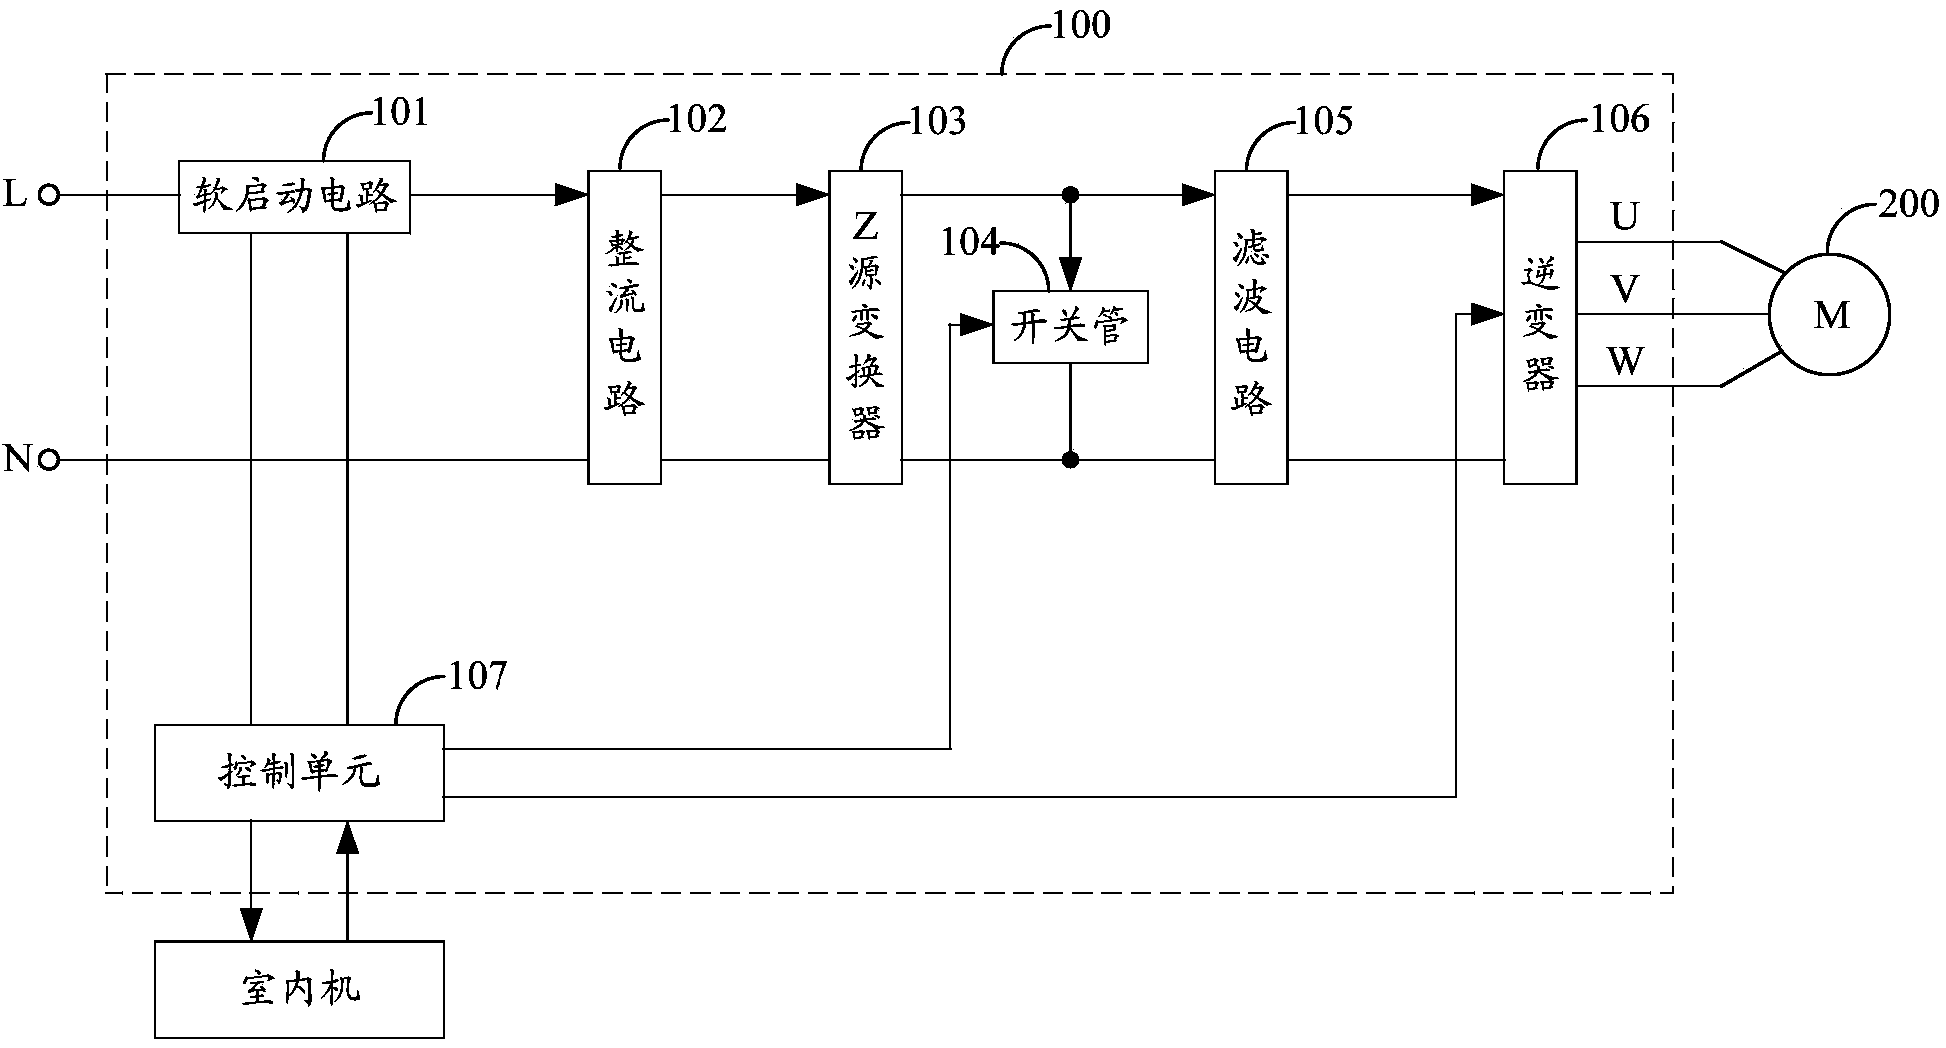 Variable frequency air-conditioner and motor control system based on Z-source converter